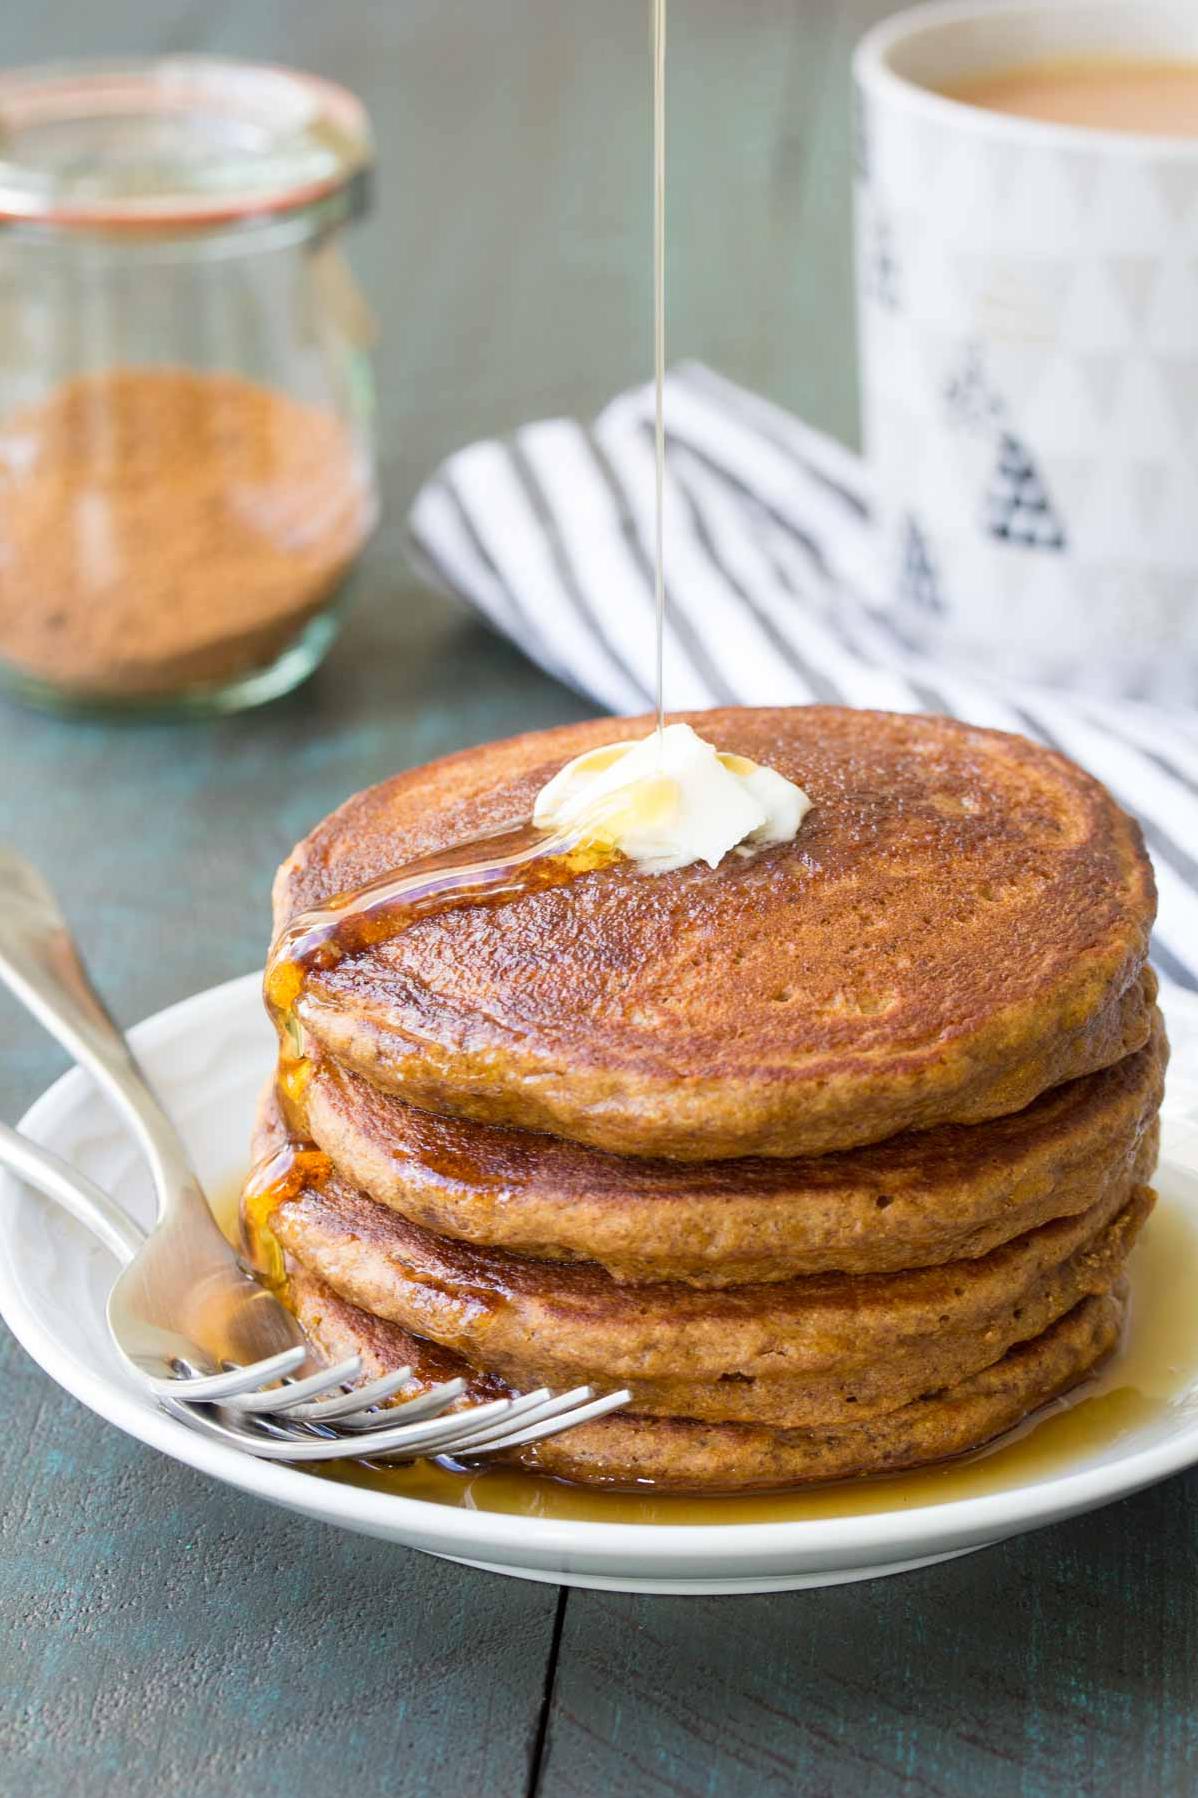  The rich and earthy flavors of molasses make these pancakes a standout breakfast choice.